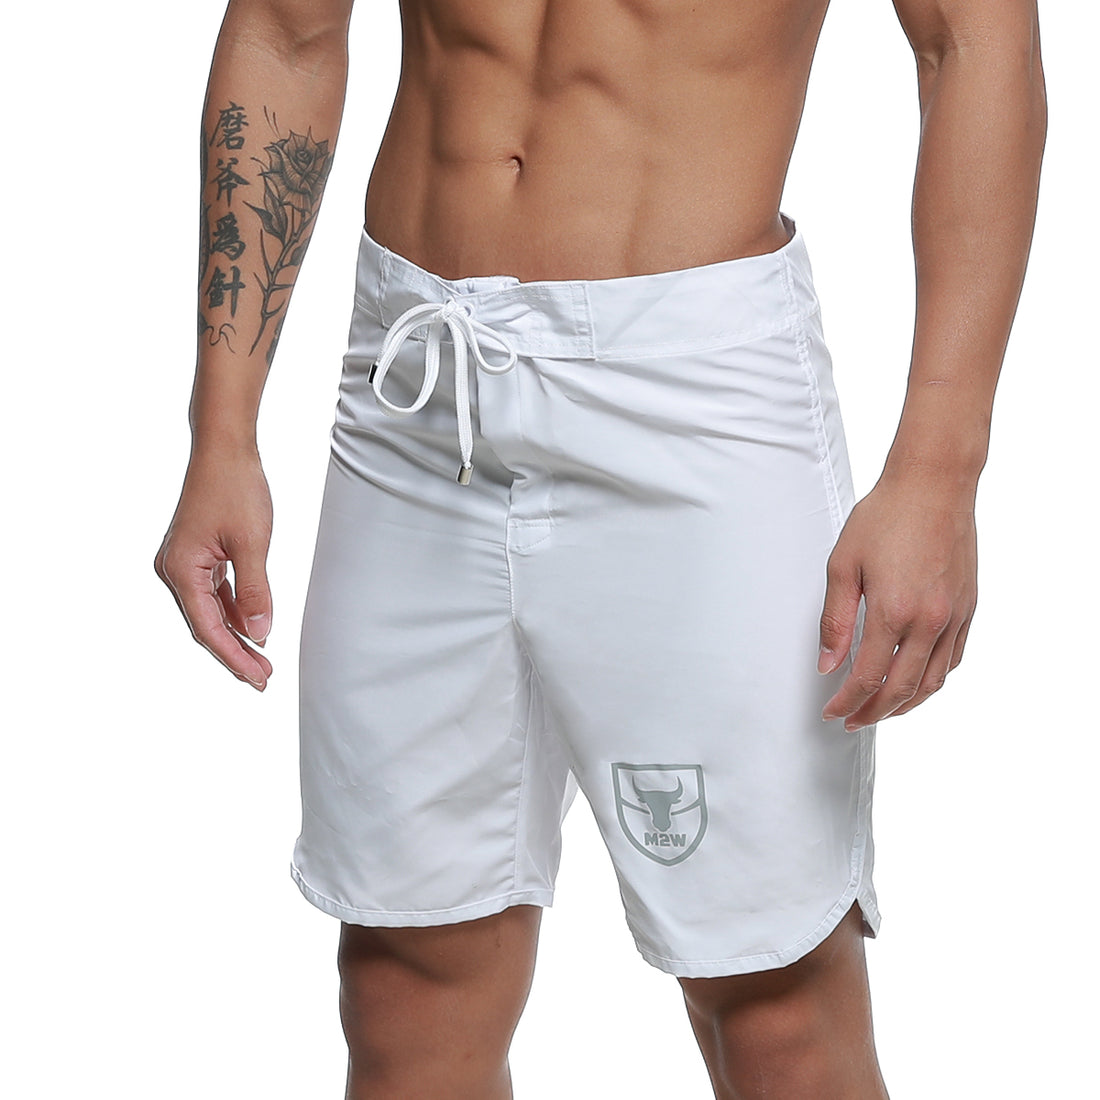 [MetroMuscleWear] Intenso Physique Board Short White (4716-01)